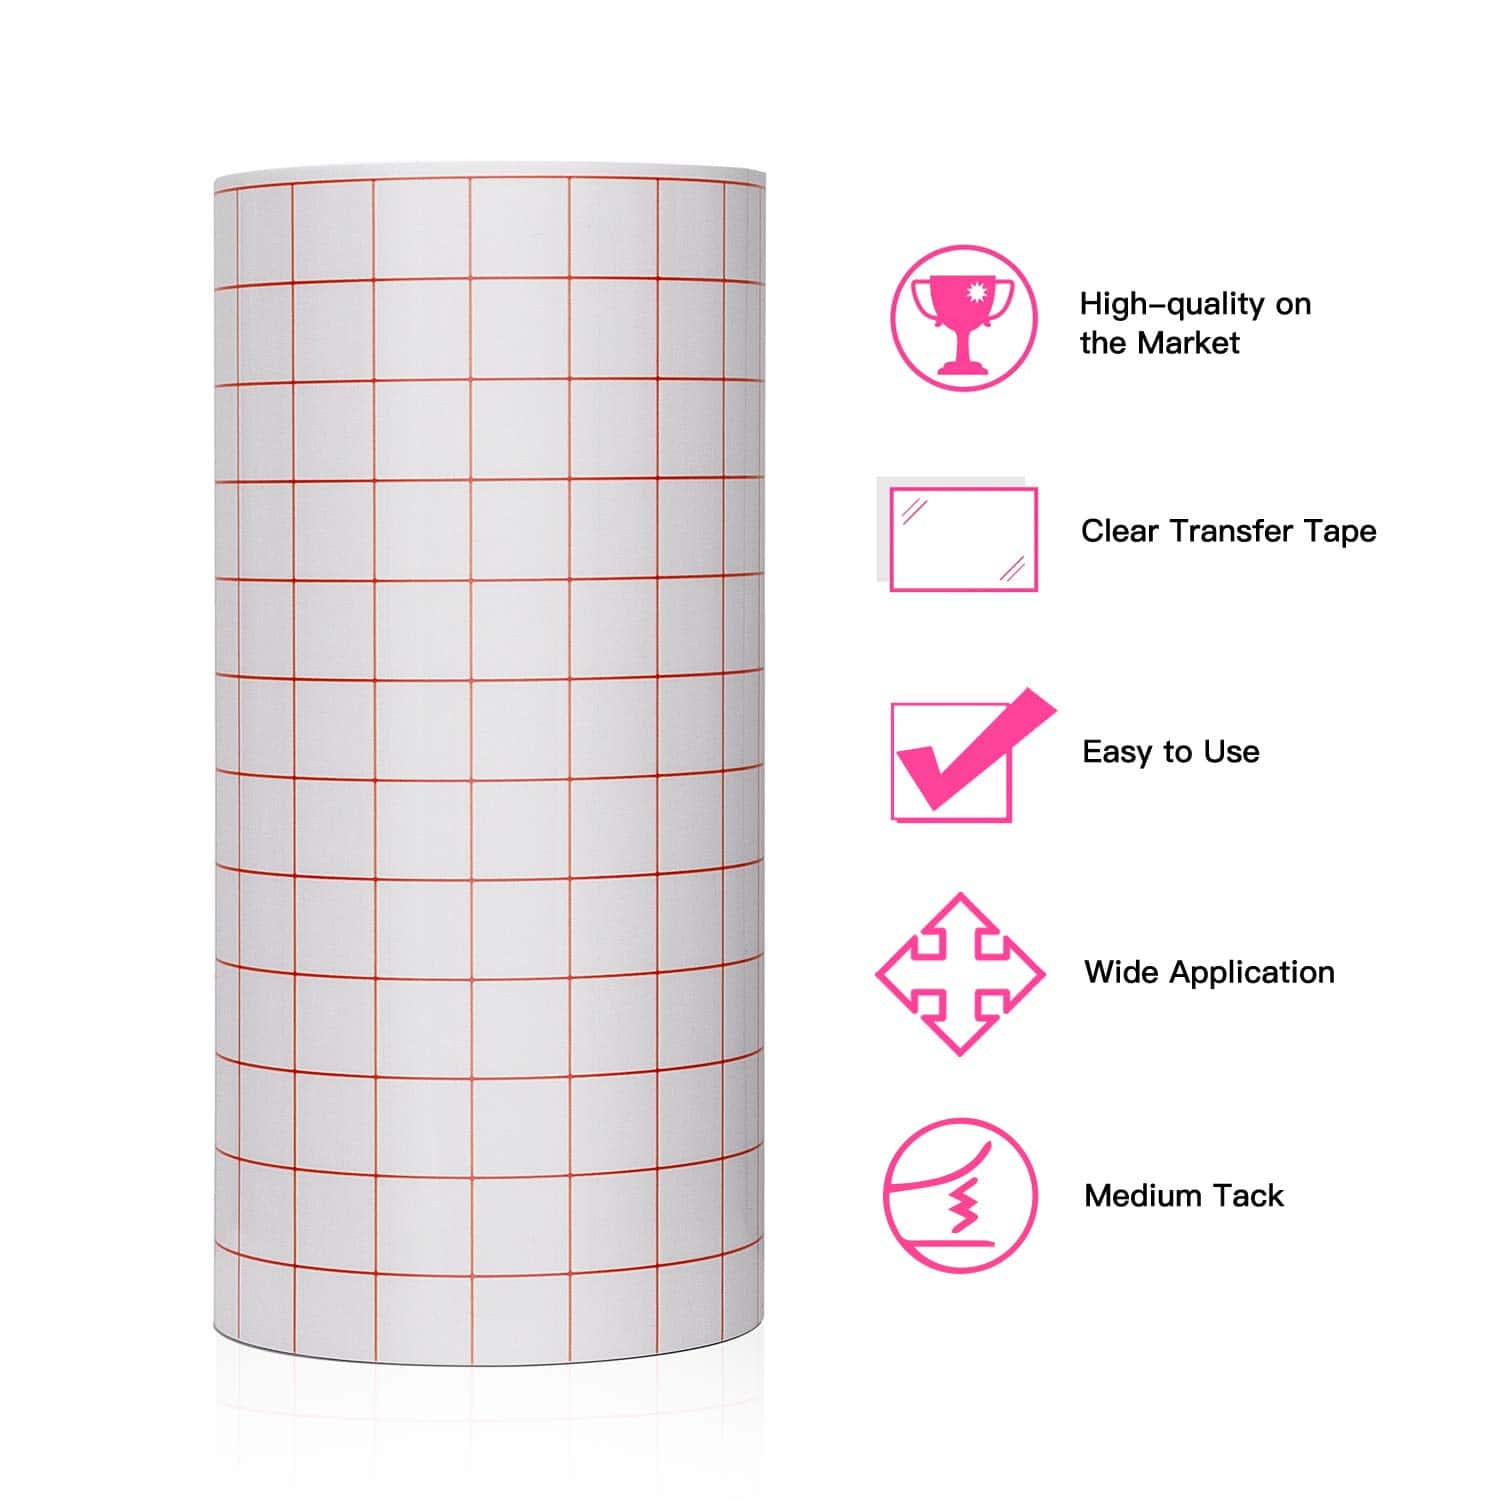 6"x50' Transfer Tape for Vinyl $7.92, 12"x30' Transfer Tape for Vinyl $9.07 + Free Shipping w/ Prime or $25+